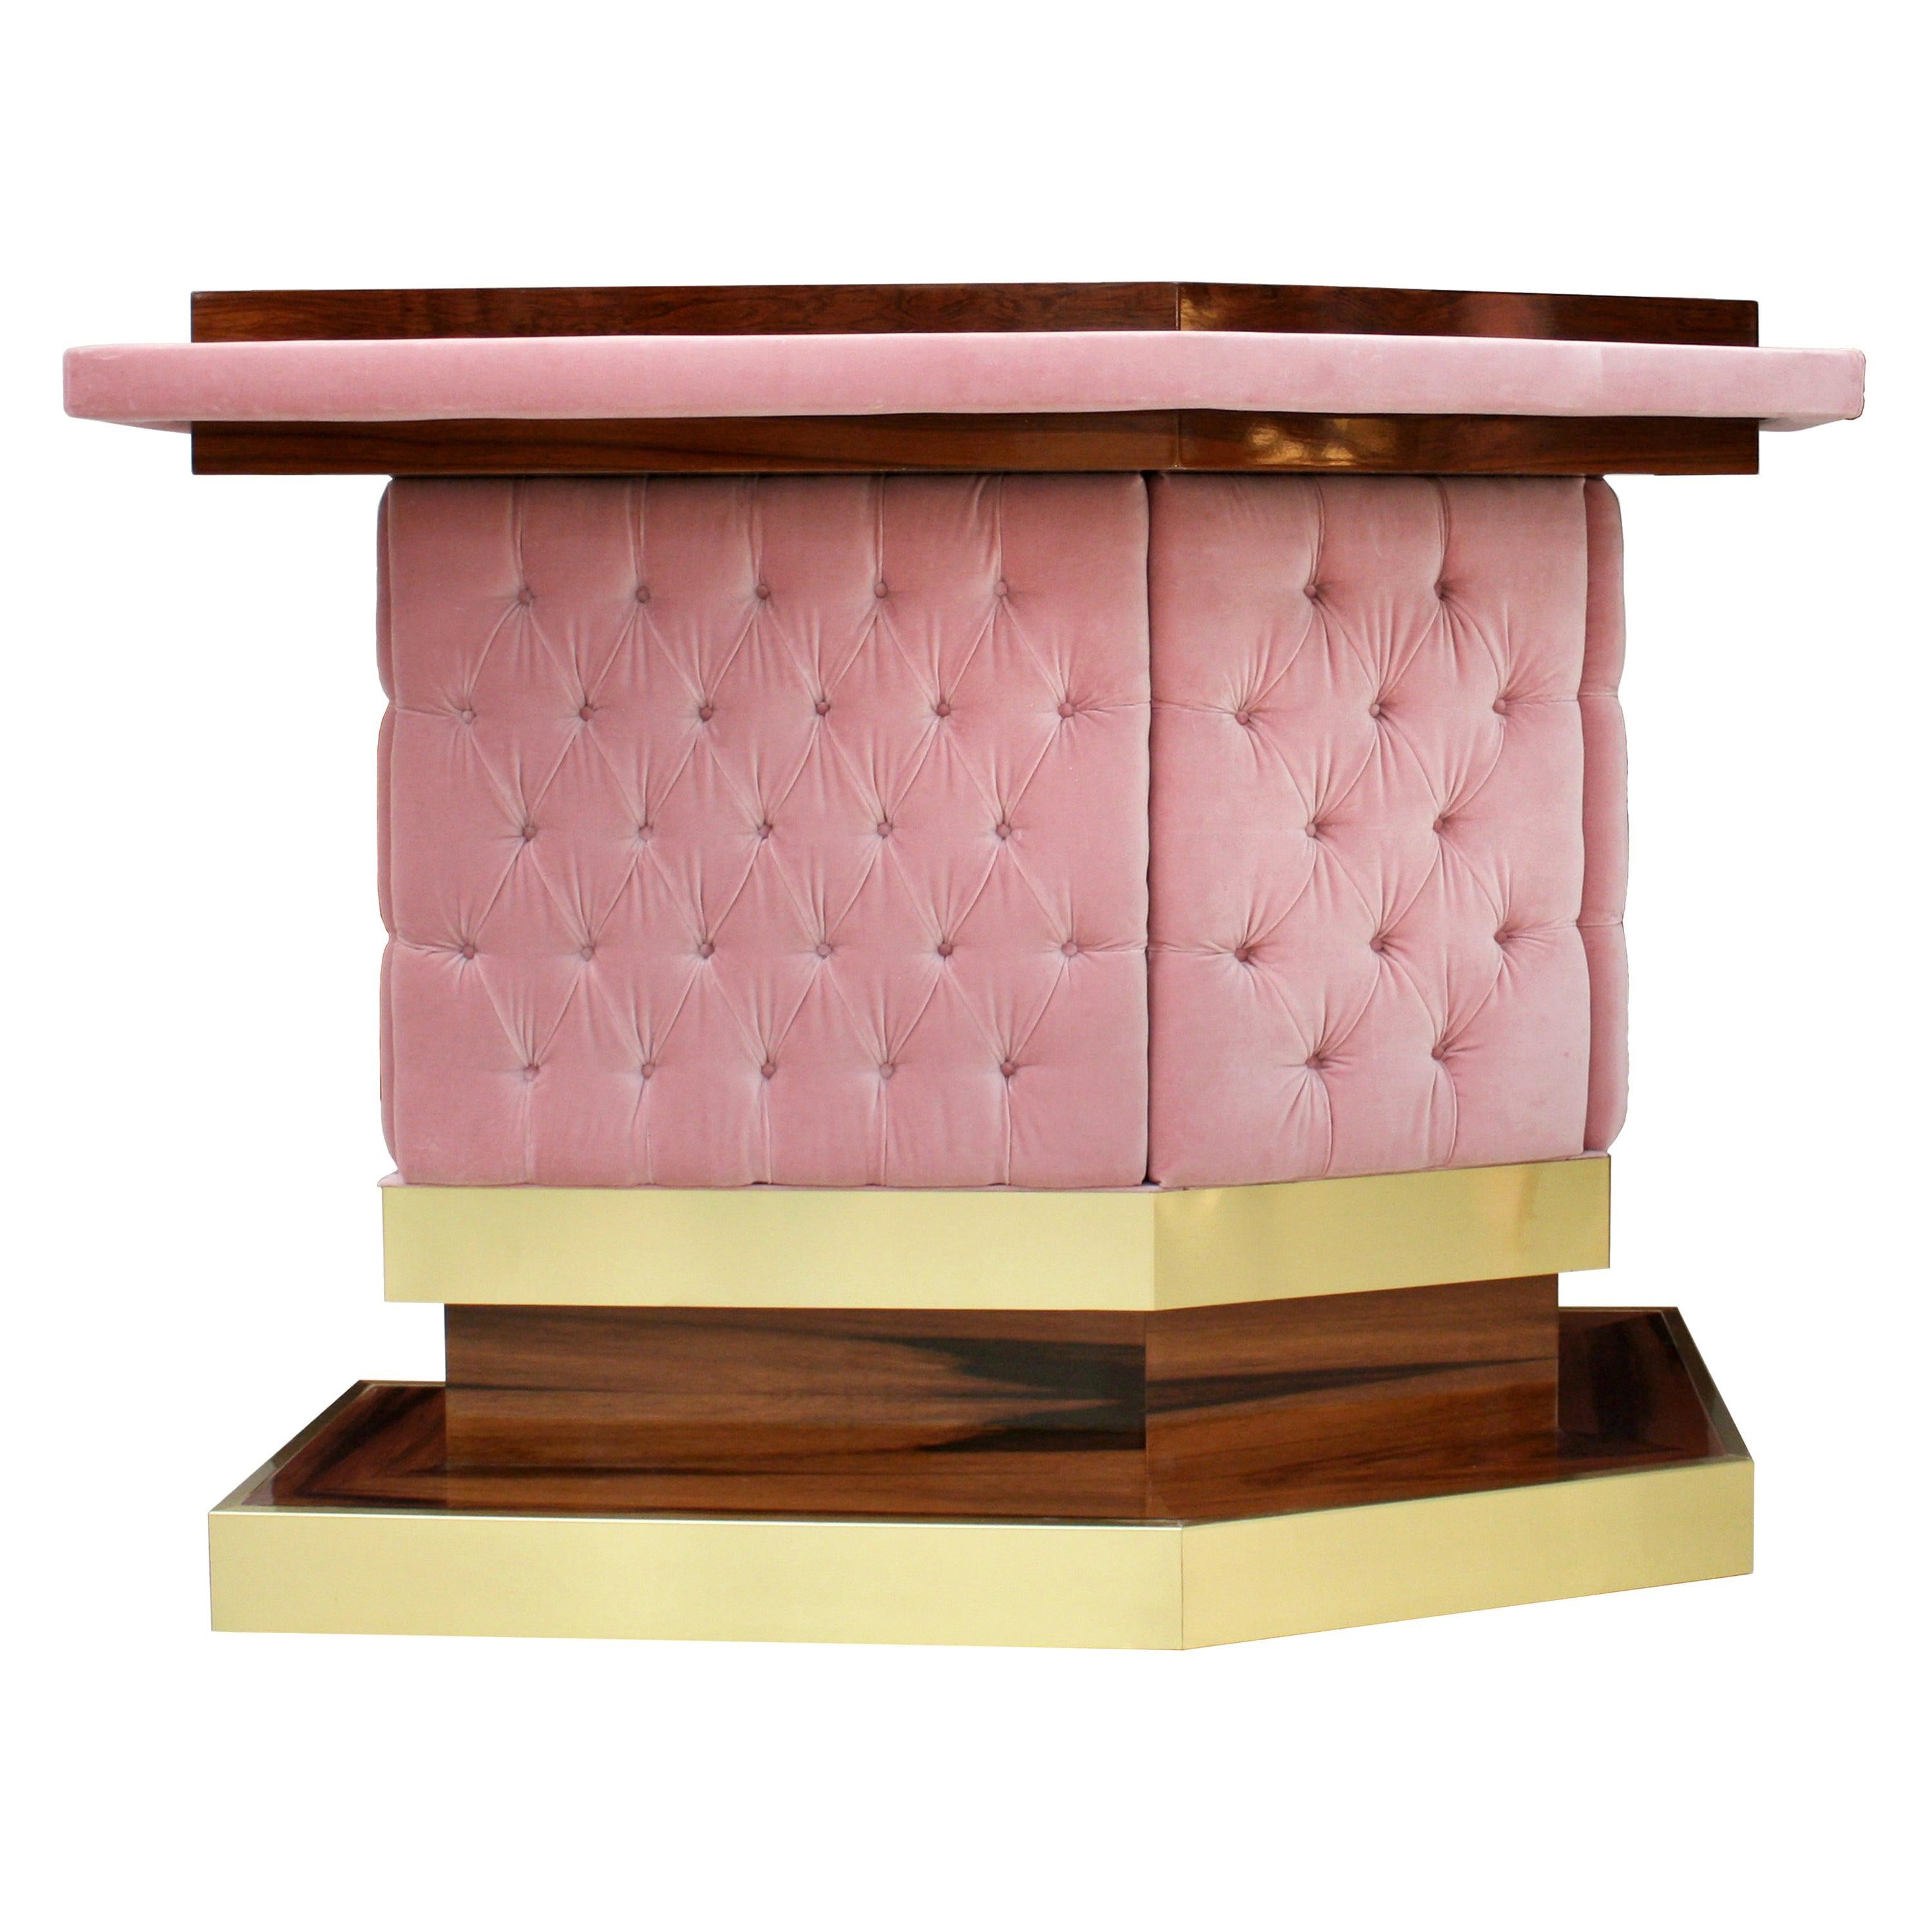 L.A. Studio Interiorismo Solid Wood and Cotton Velvet Upholstered Bar Counter